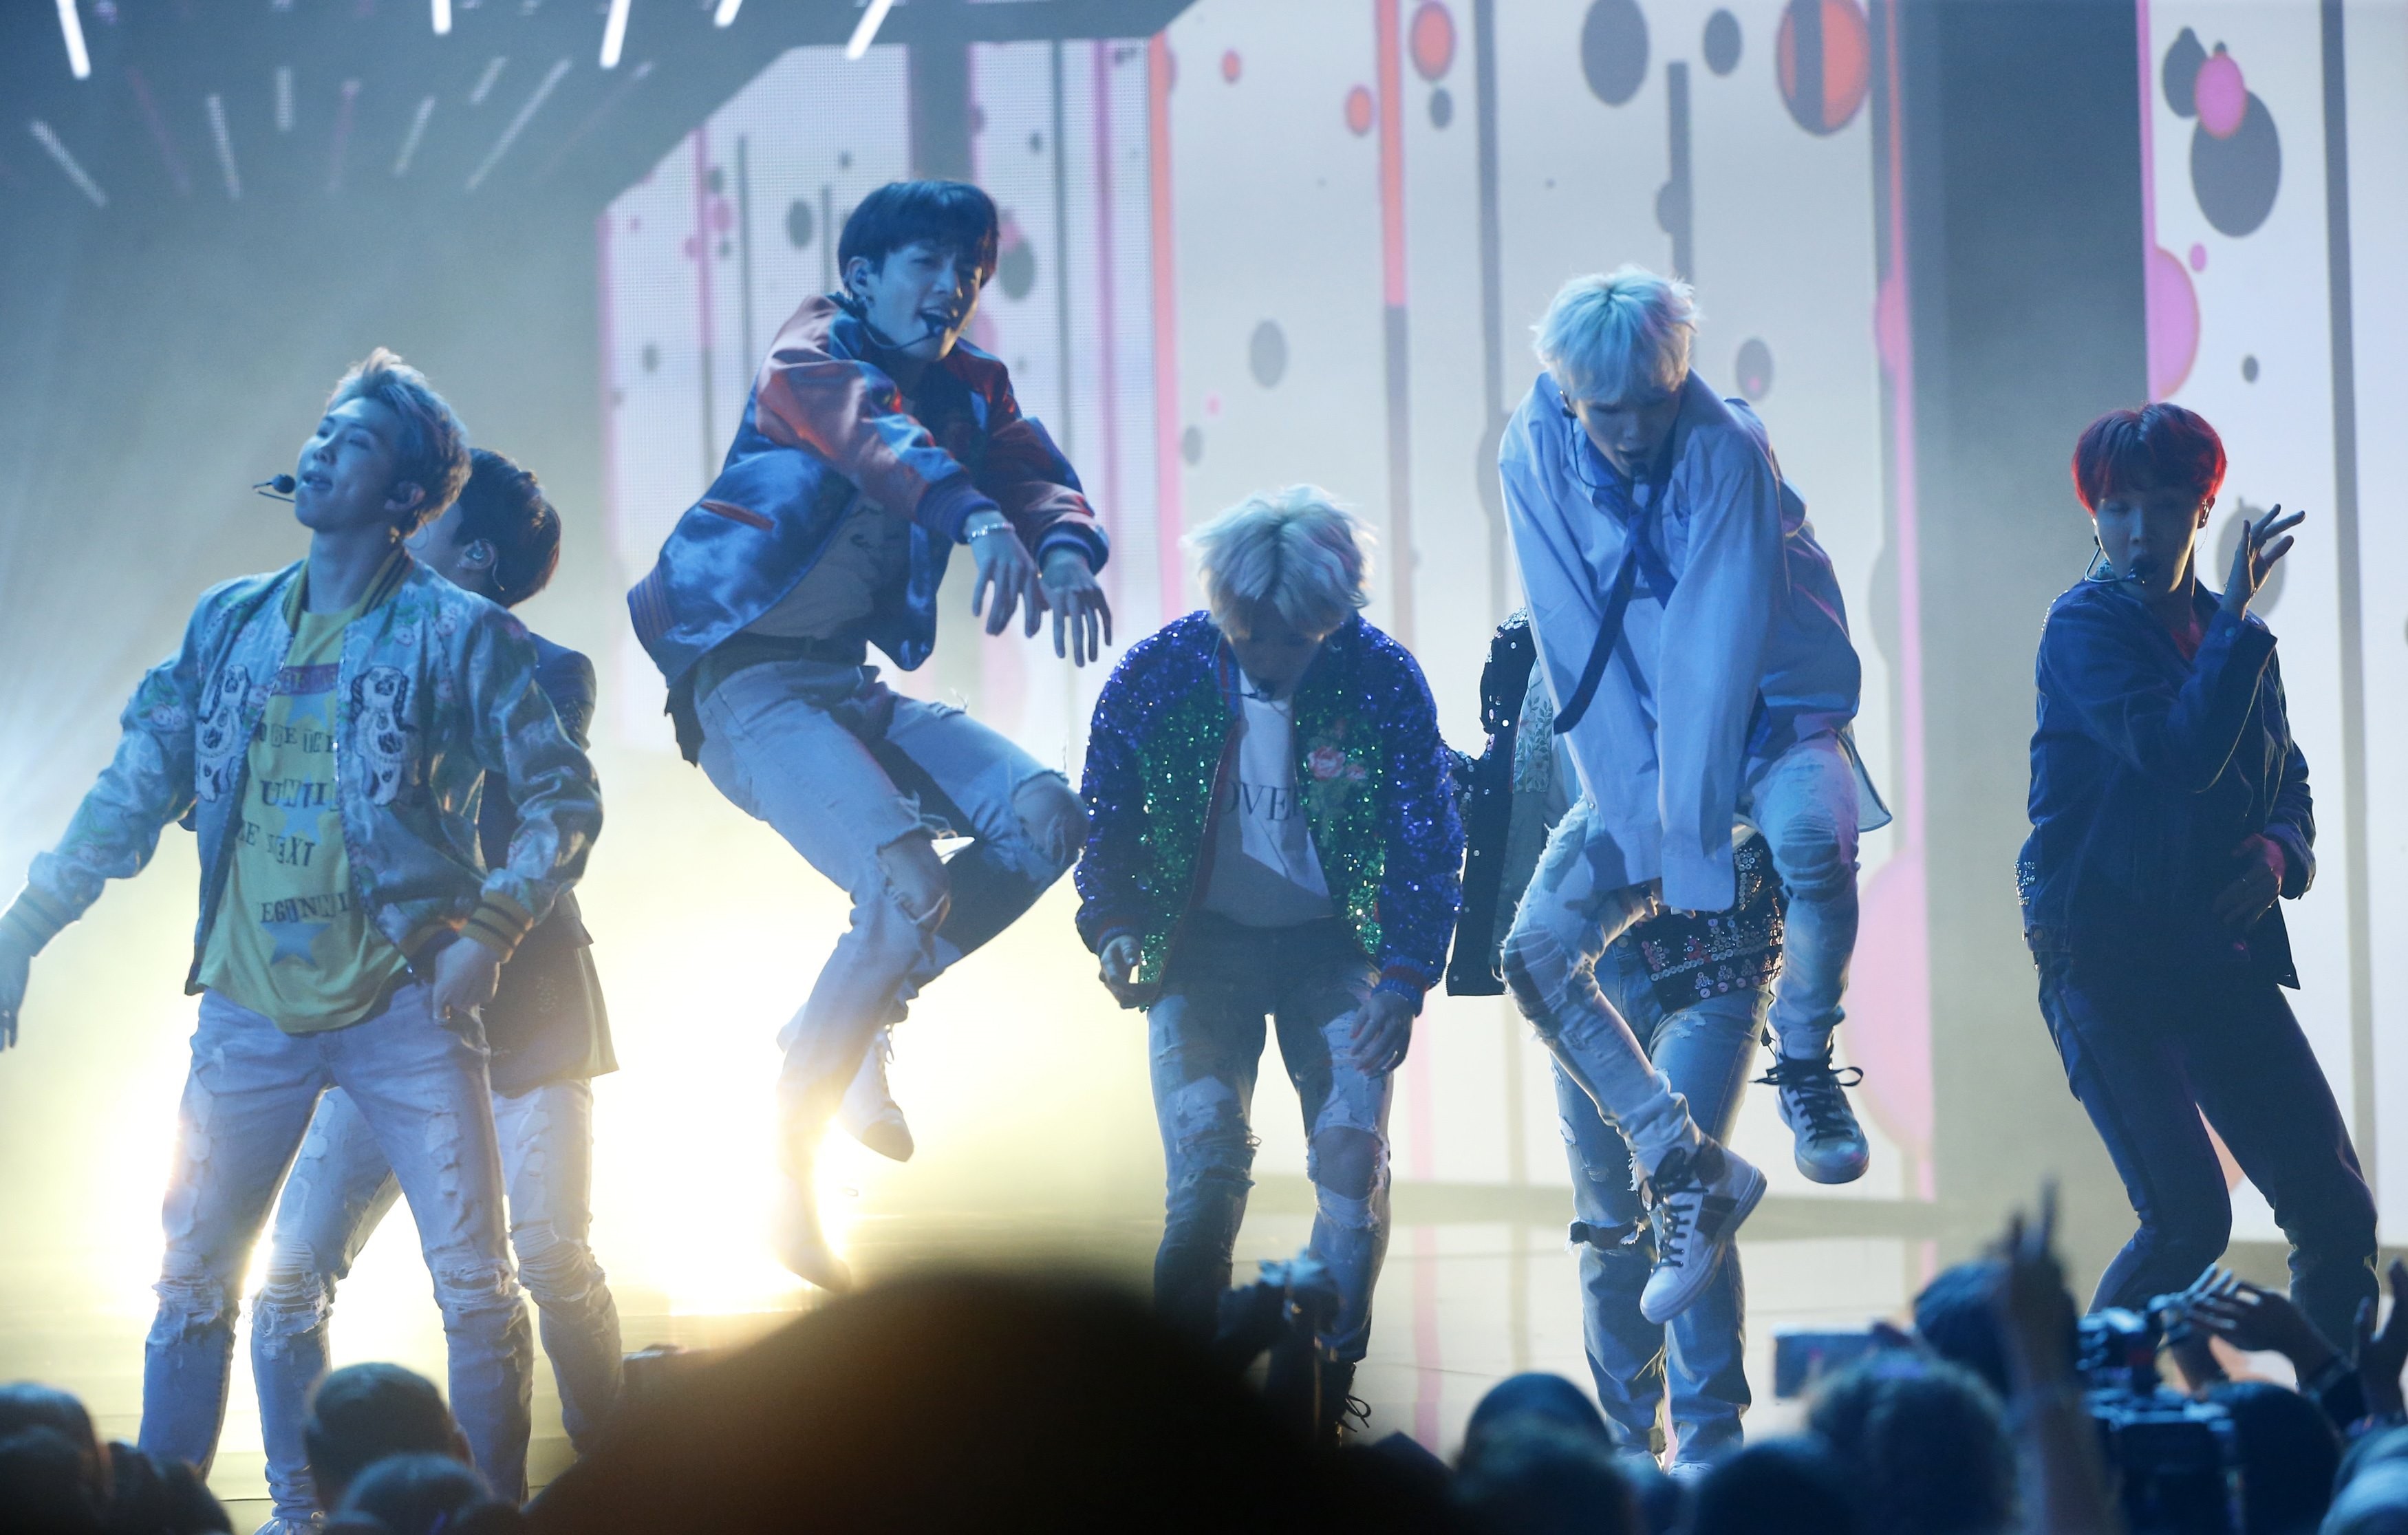 BTS performing at the 2017 American Music Awards. Photo: Reuters